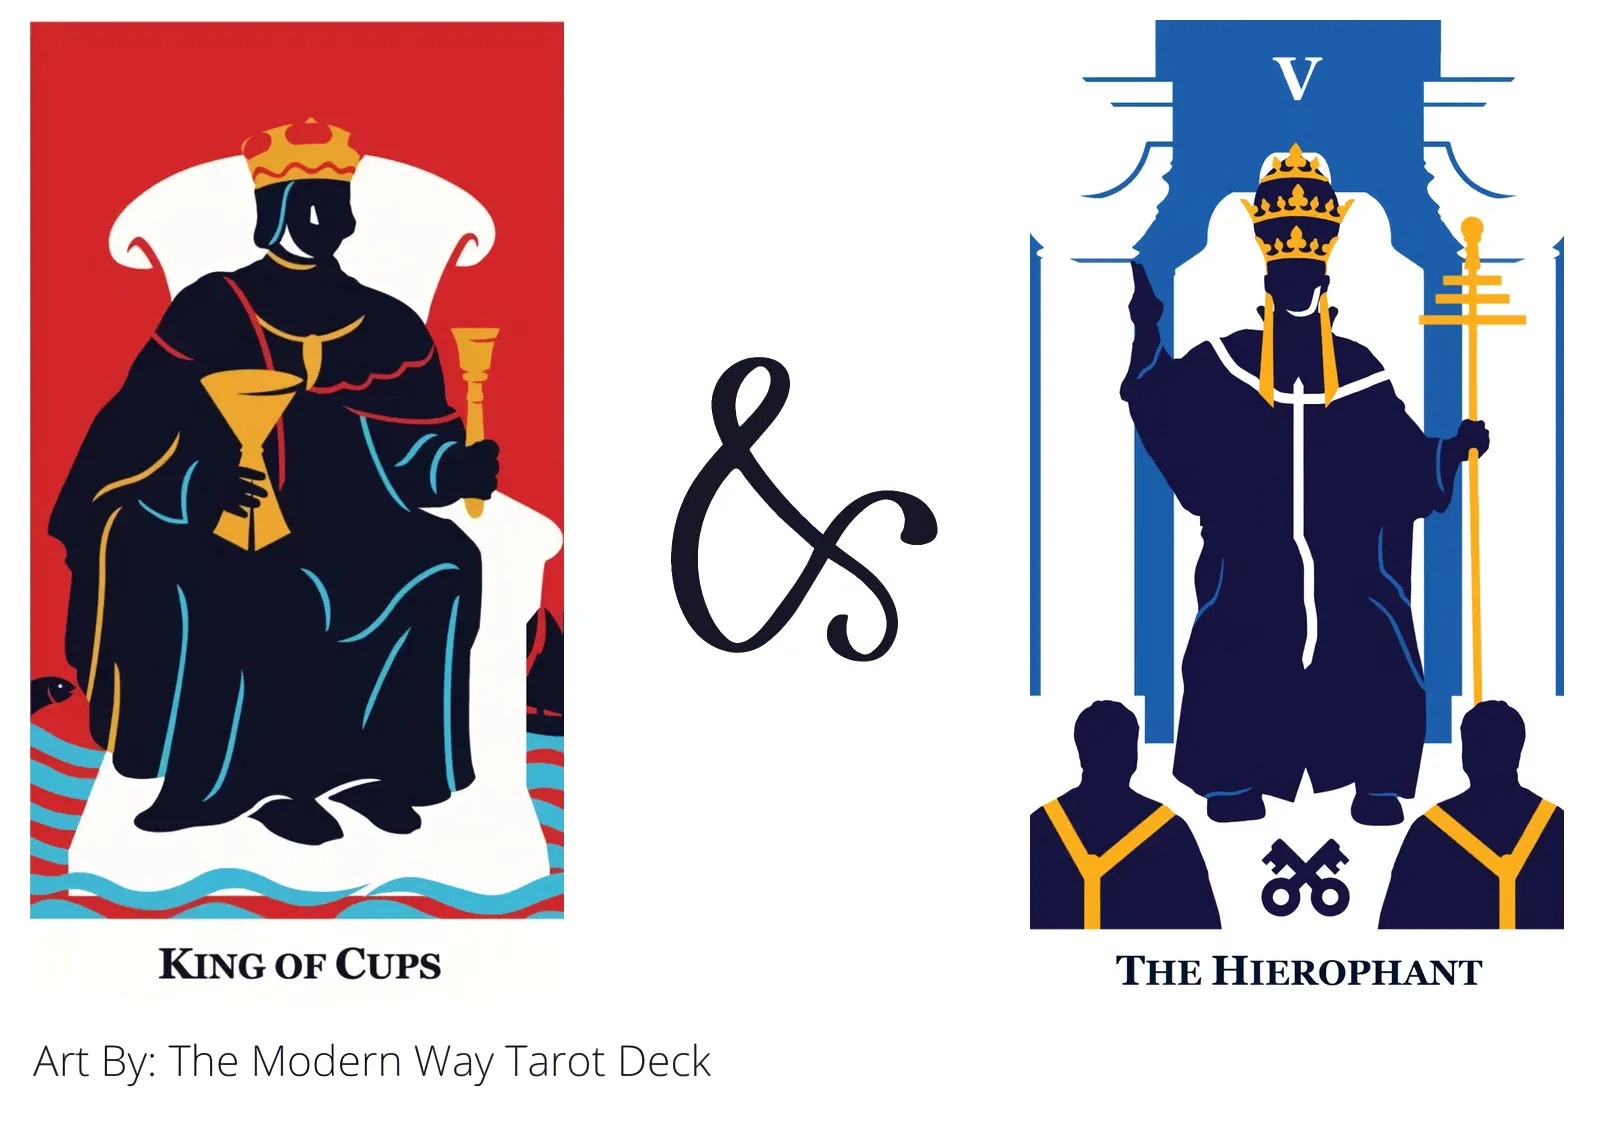 king of cups and the hierophant tarot cards together